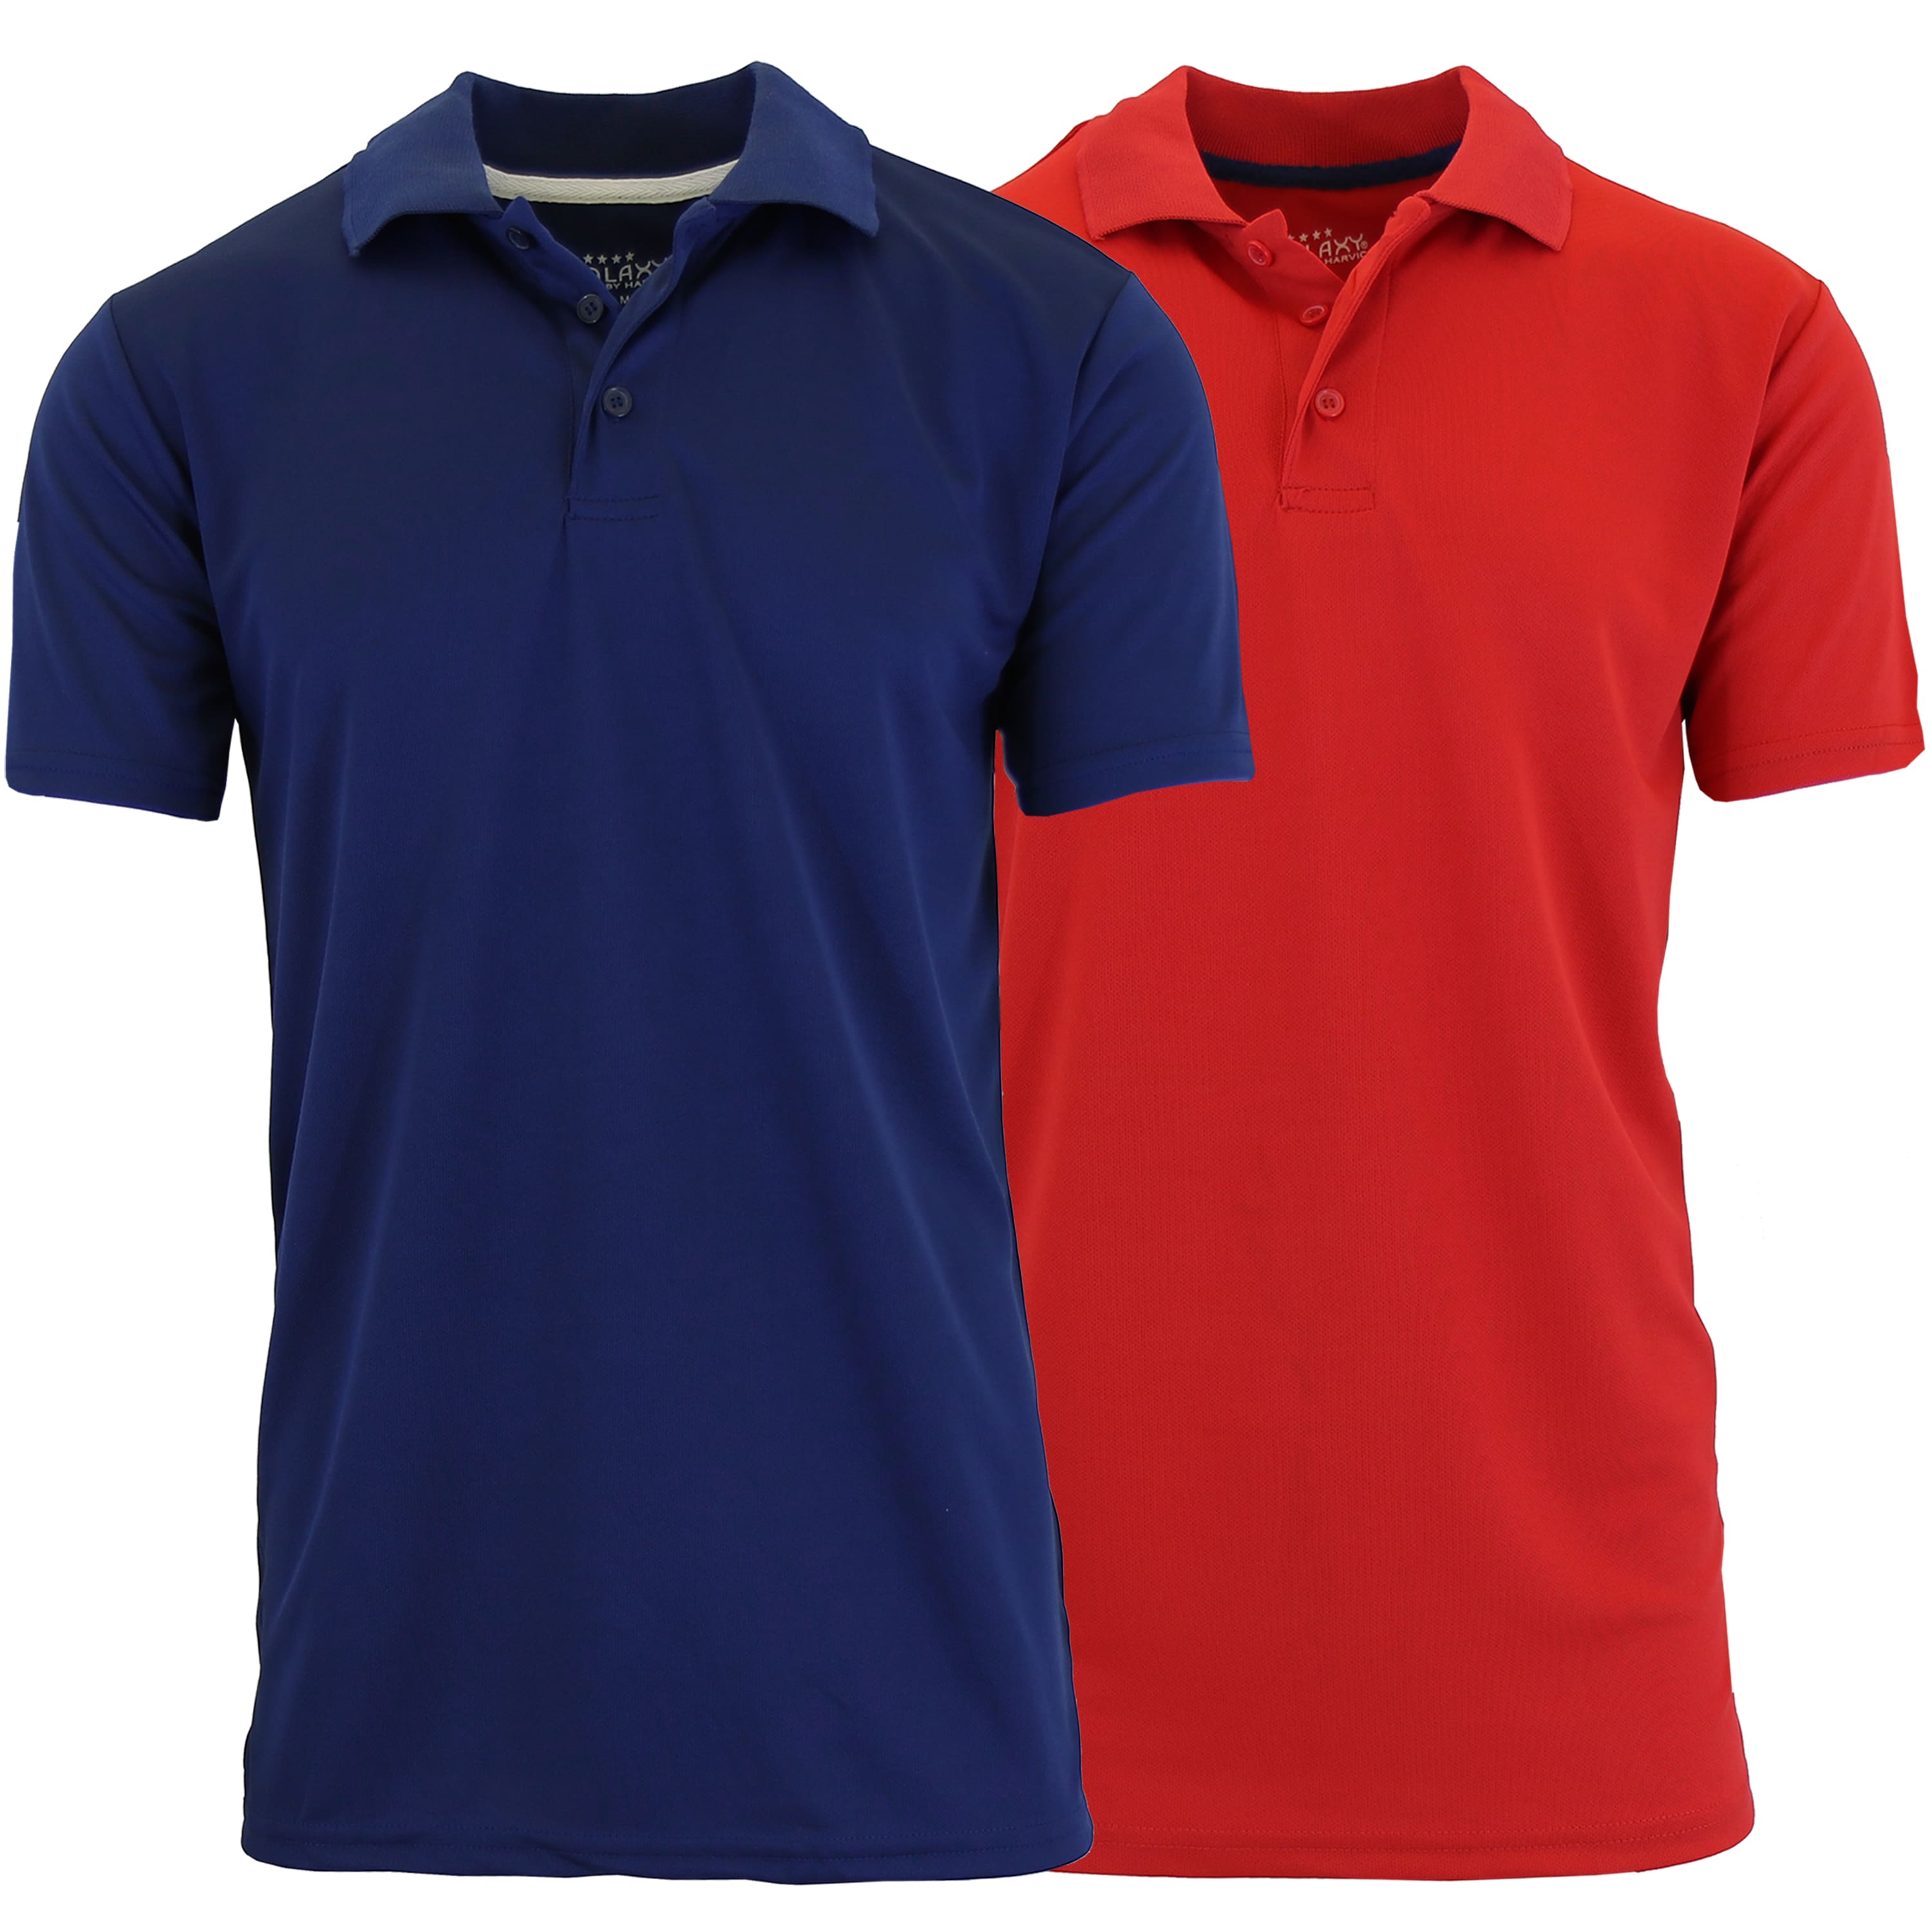 Galaxy by Harvic Tagless Dry-Fit Moisture-Wicking Men's Polo Shirt 2 Pack